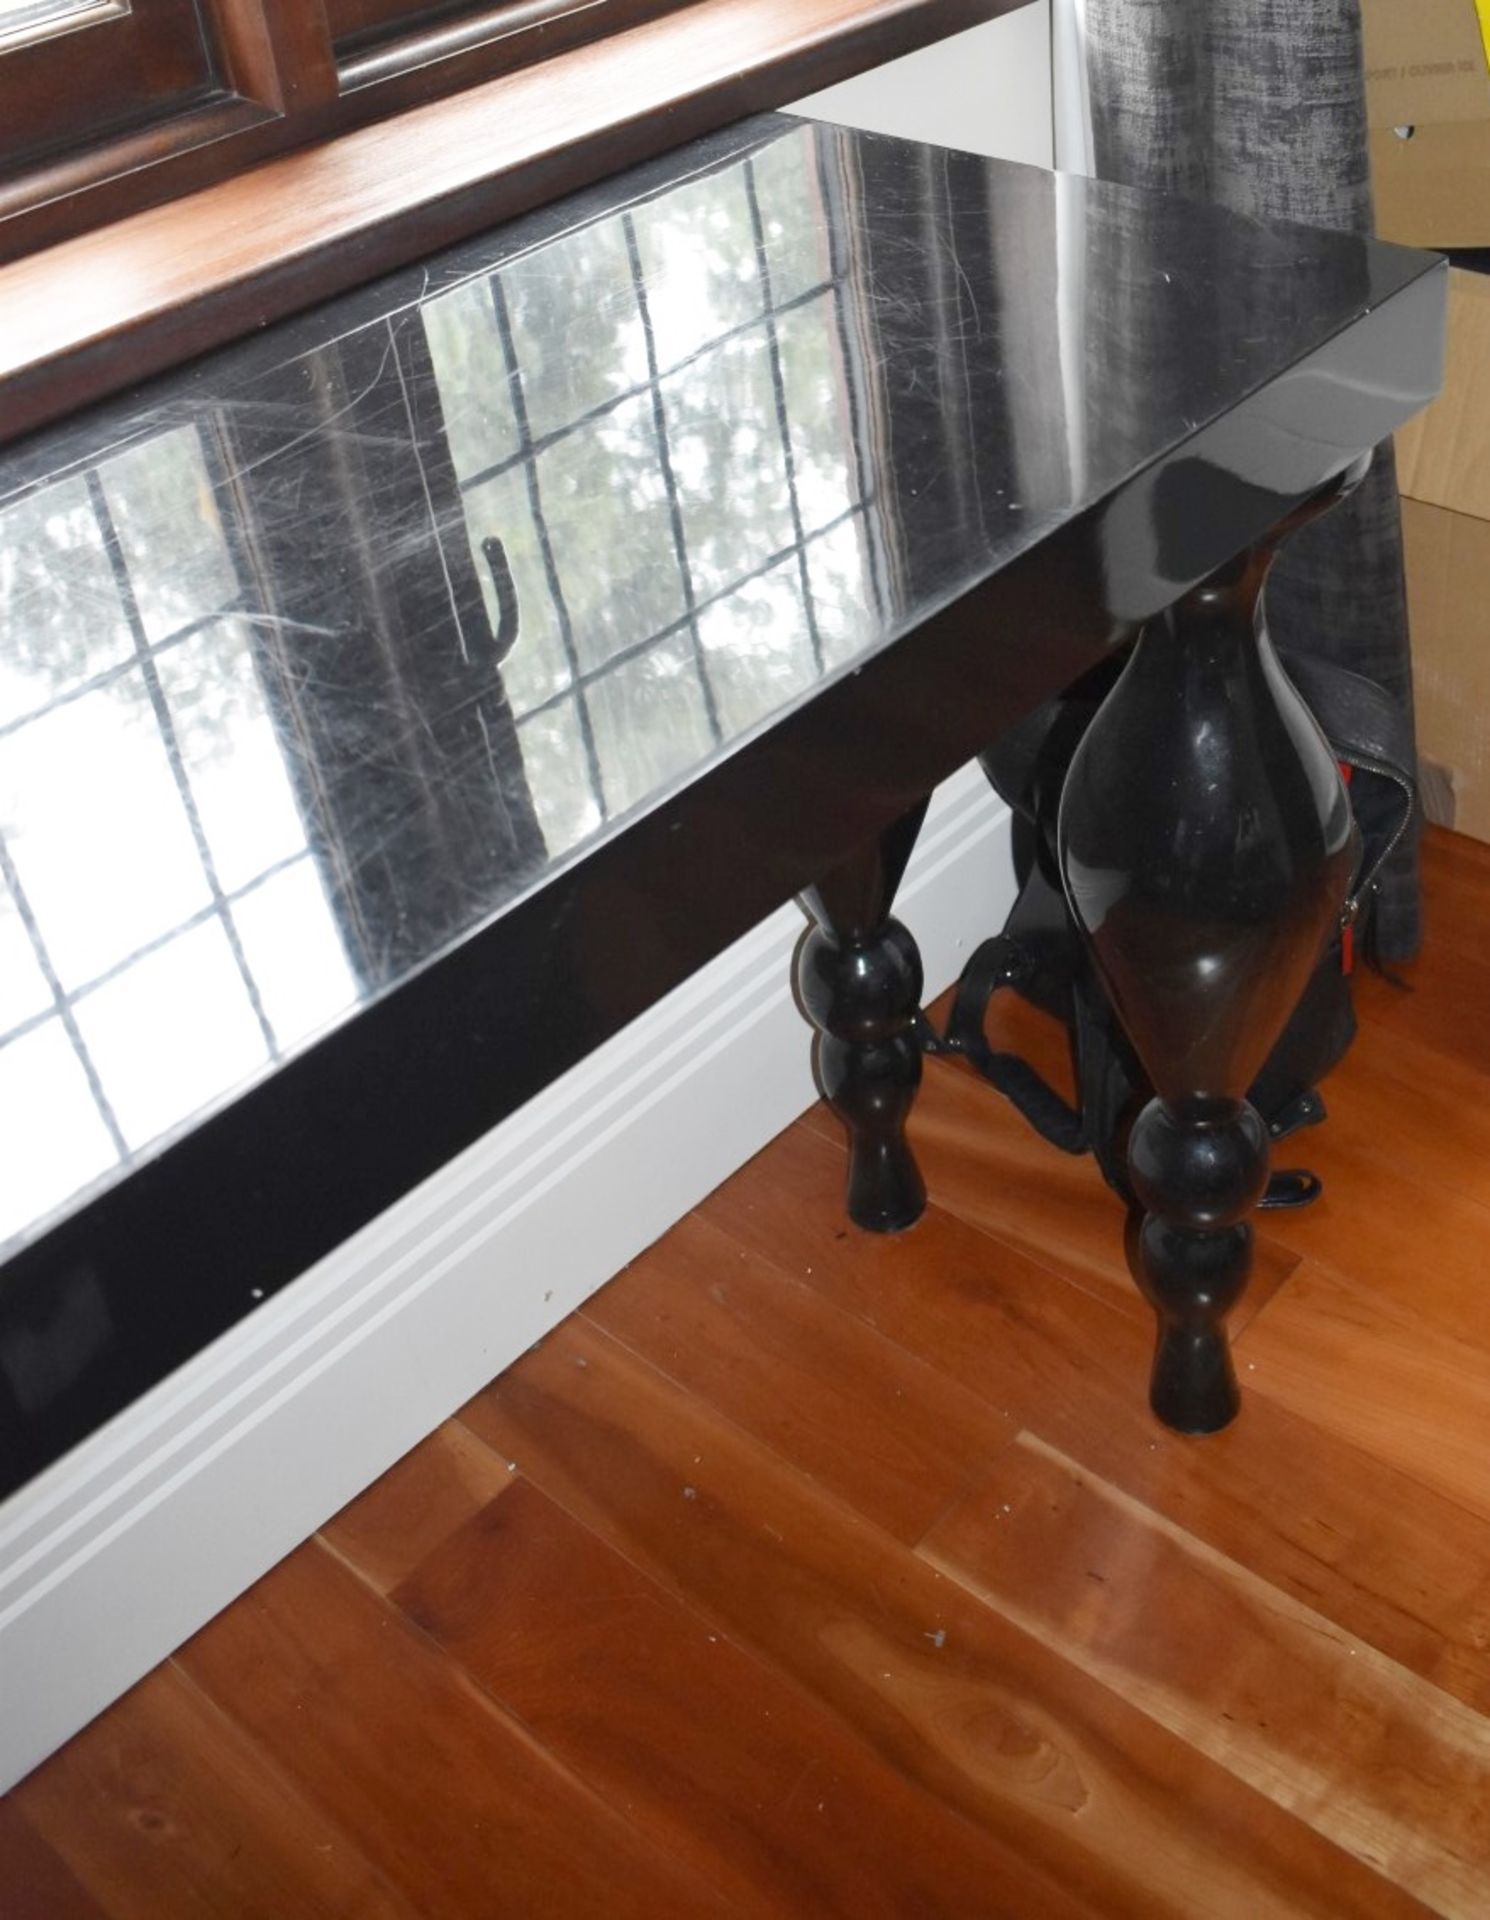 1 x Console Table With a Lacquered Black Finish and Turned Legs - Size H89 x W200 x D50 cms - - Image 5 of 6